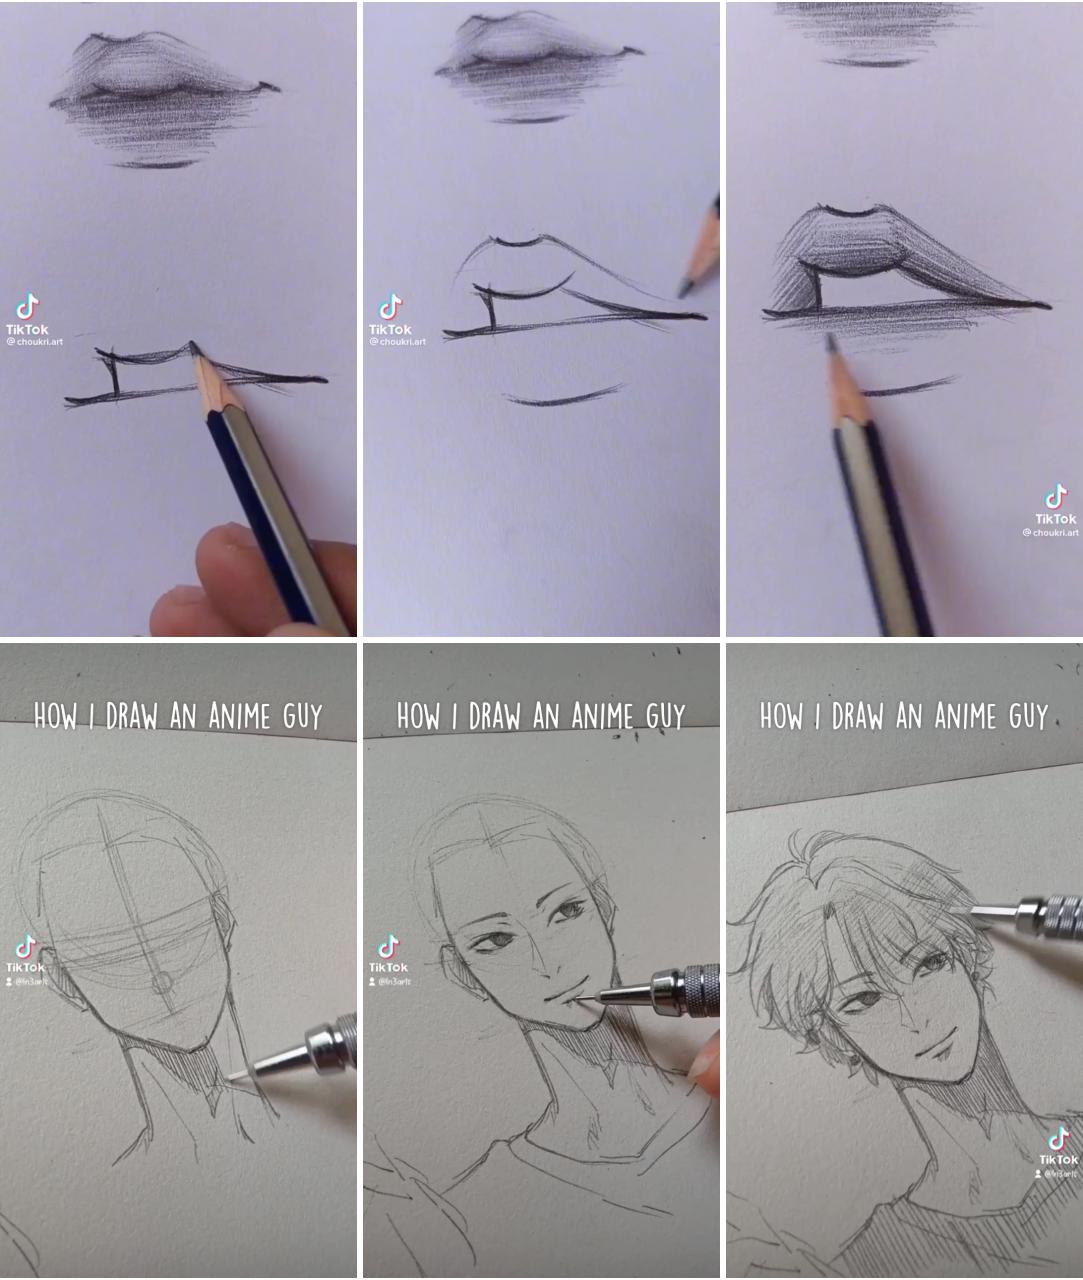 How i draw an anime guy | cool pencil drawings